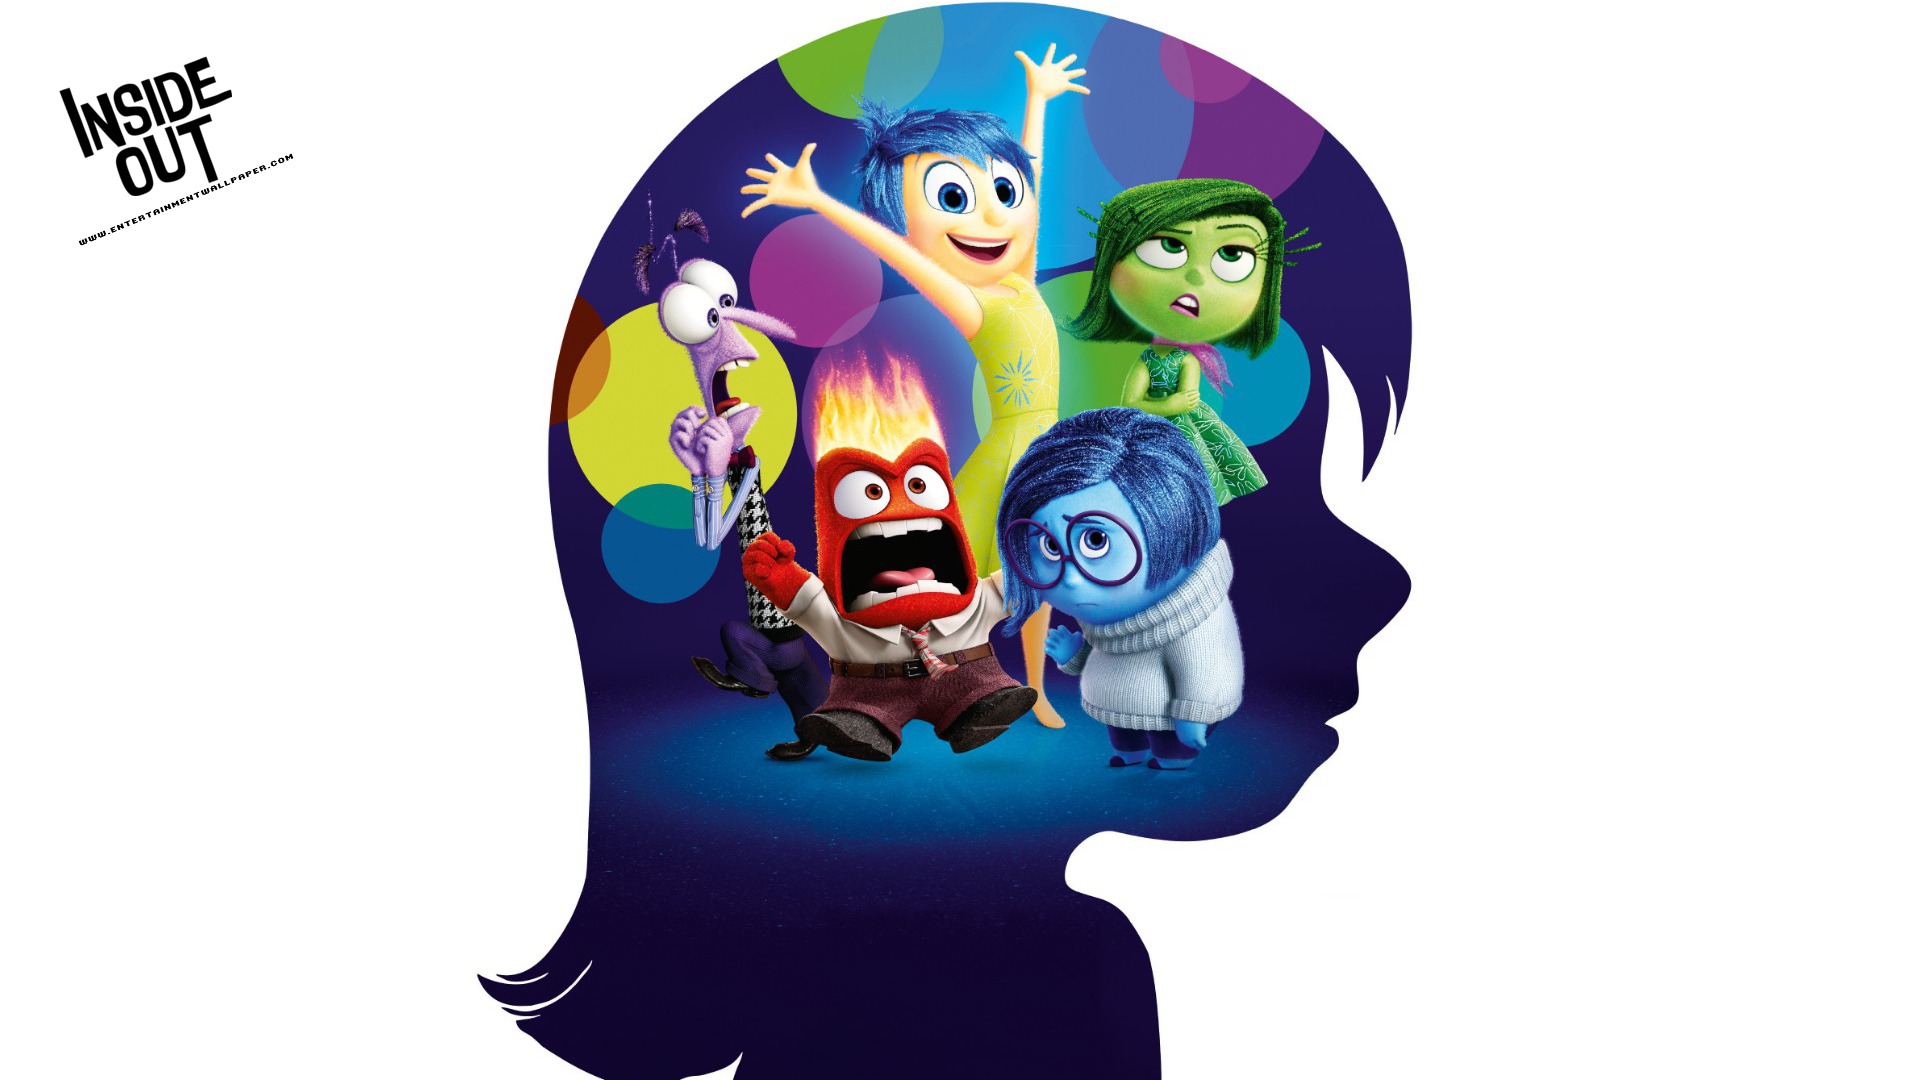  inside out 2015 wallpaper 10046181 size 1920x1080 more inside out 2015